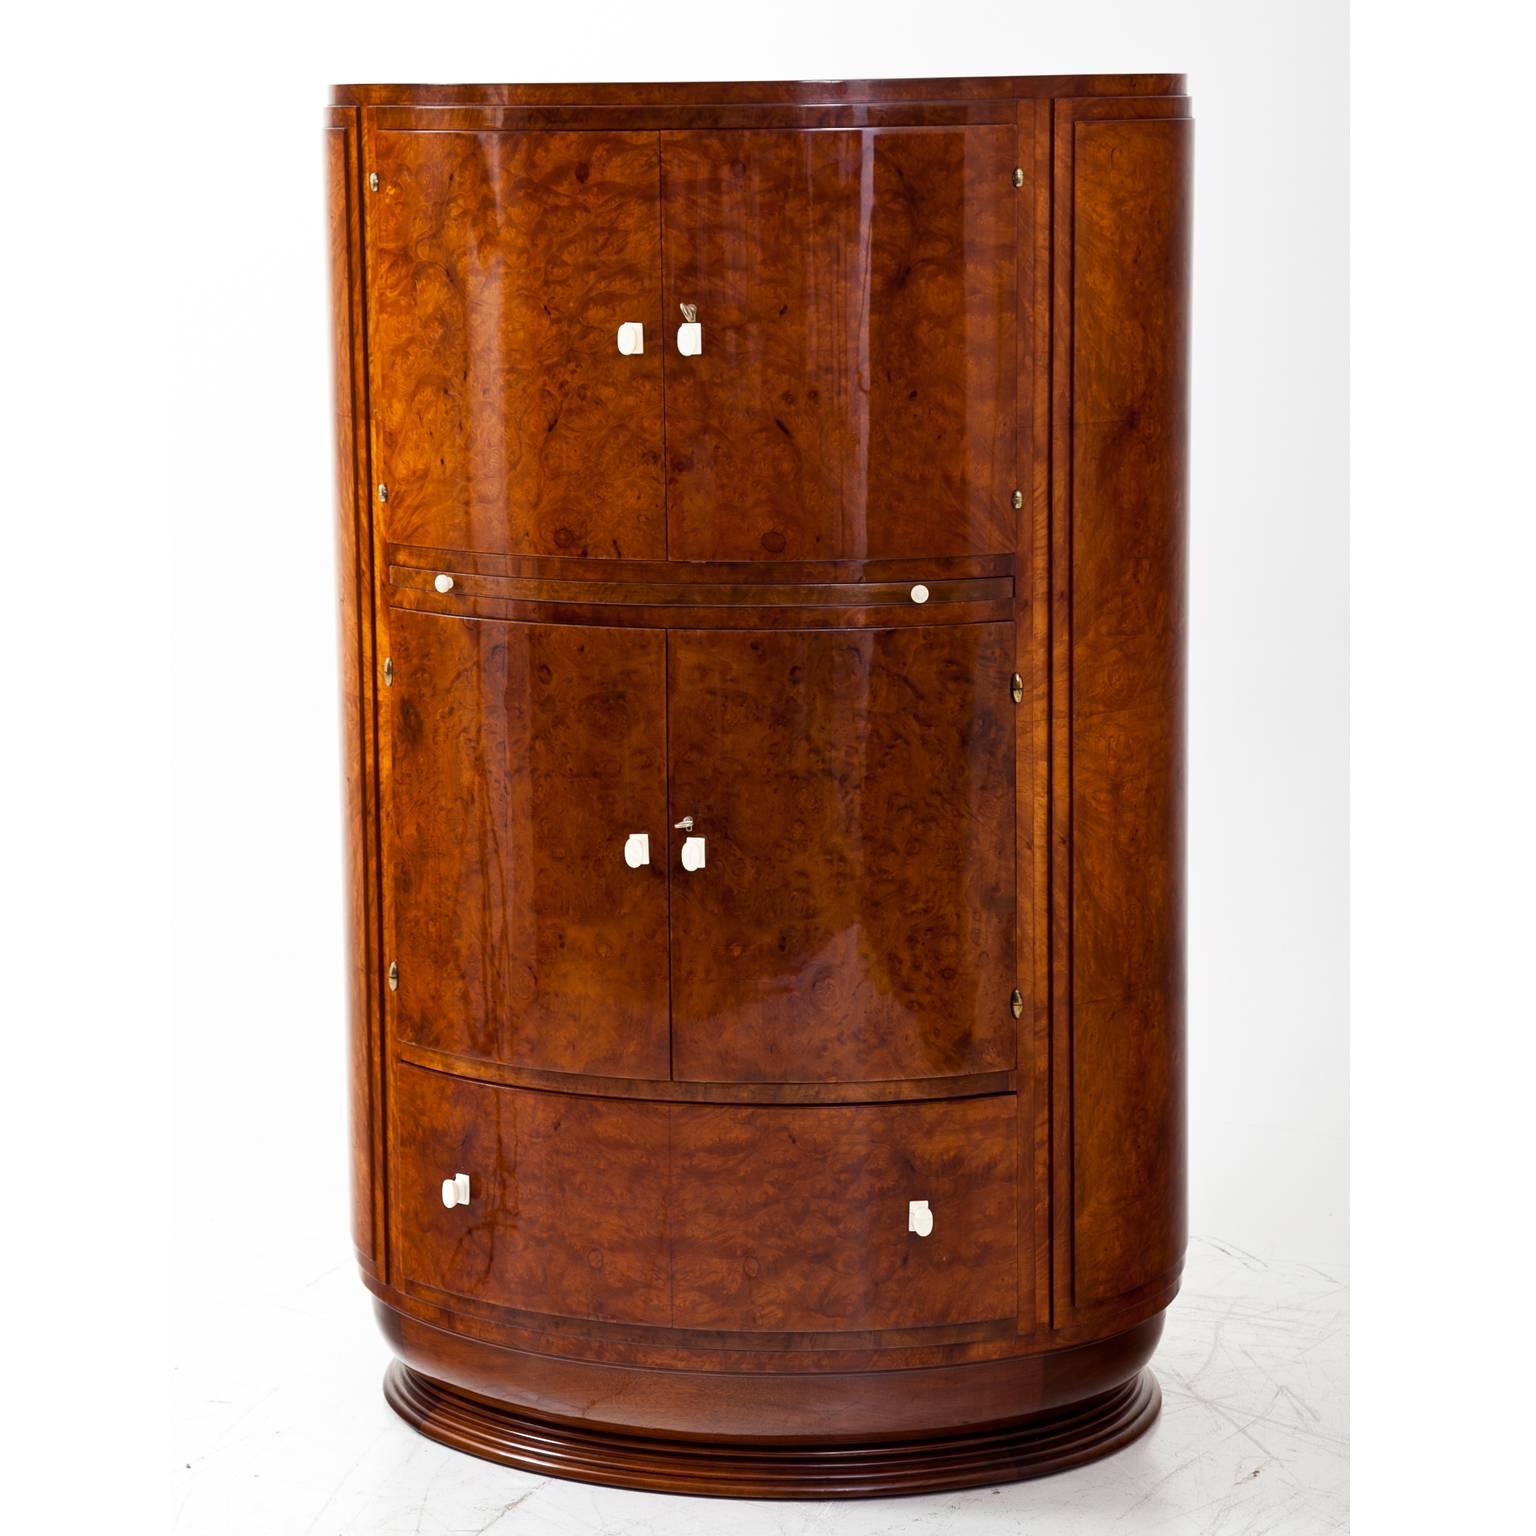 Art Deco bar cabinet with an oval body on a profiled base. The handles are bone and the sides are accentuated. The cabinet has at the bottom one large drawer, the middle and the top are two-doored compartments for bottles and glasses.